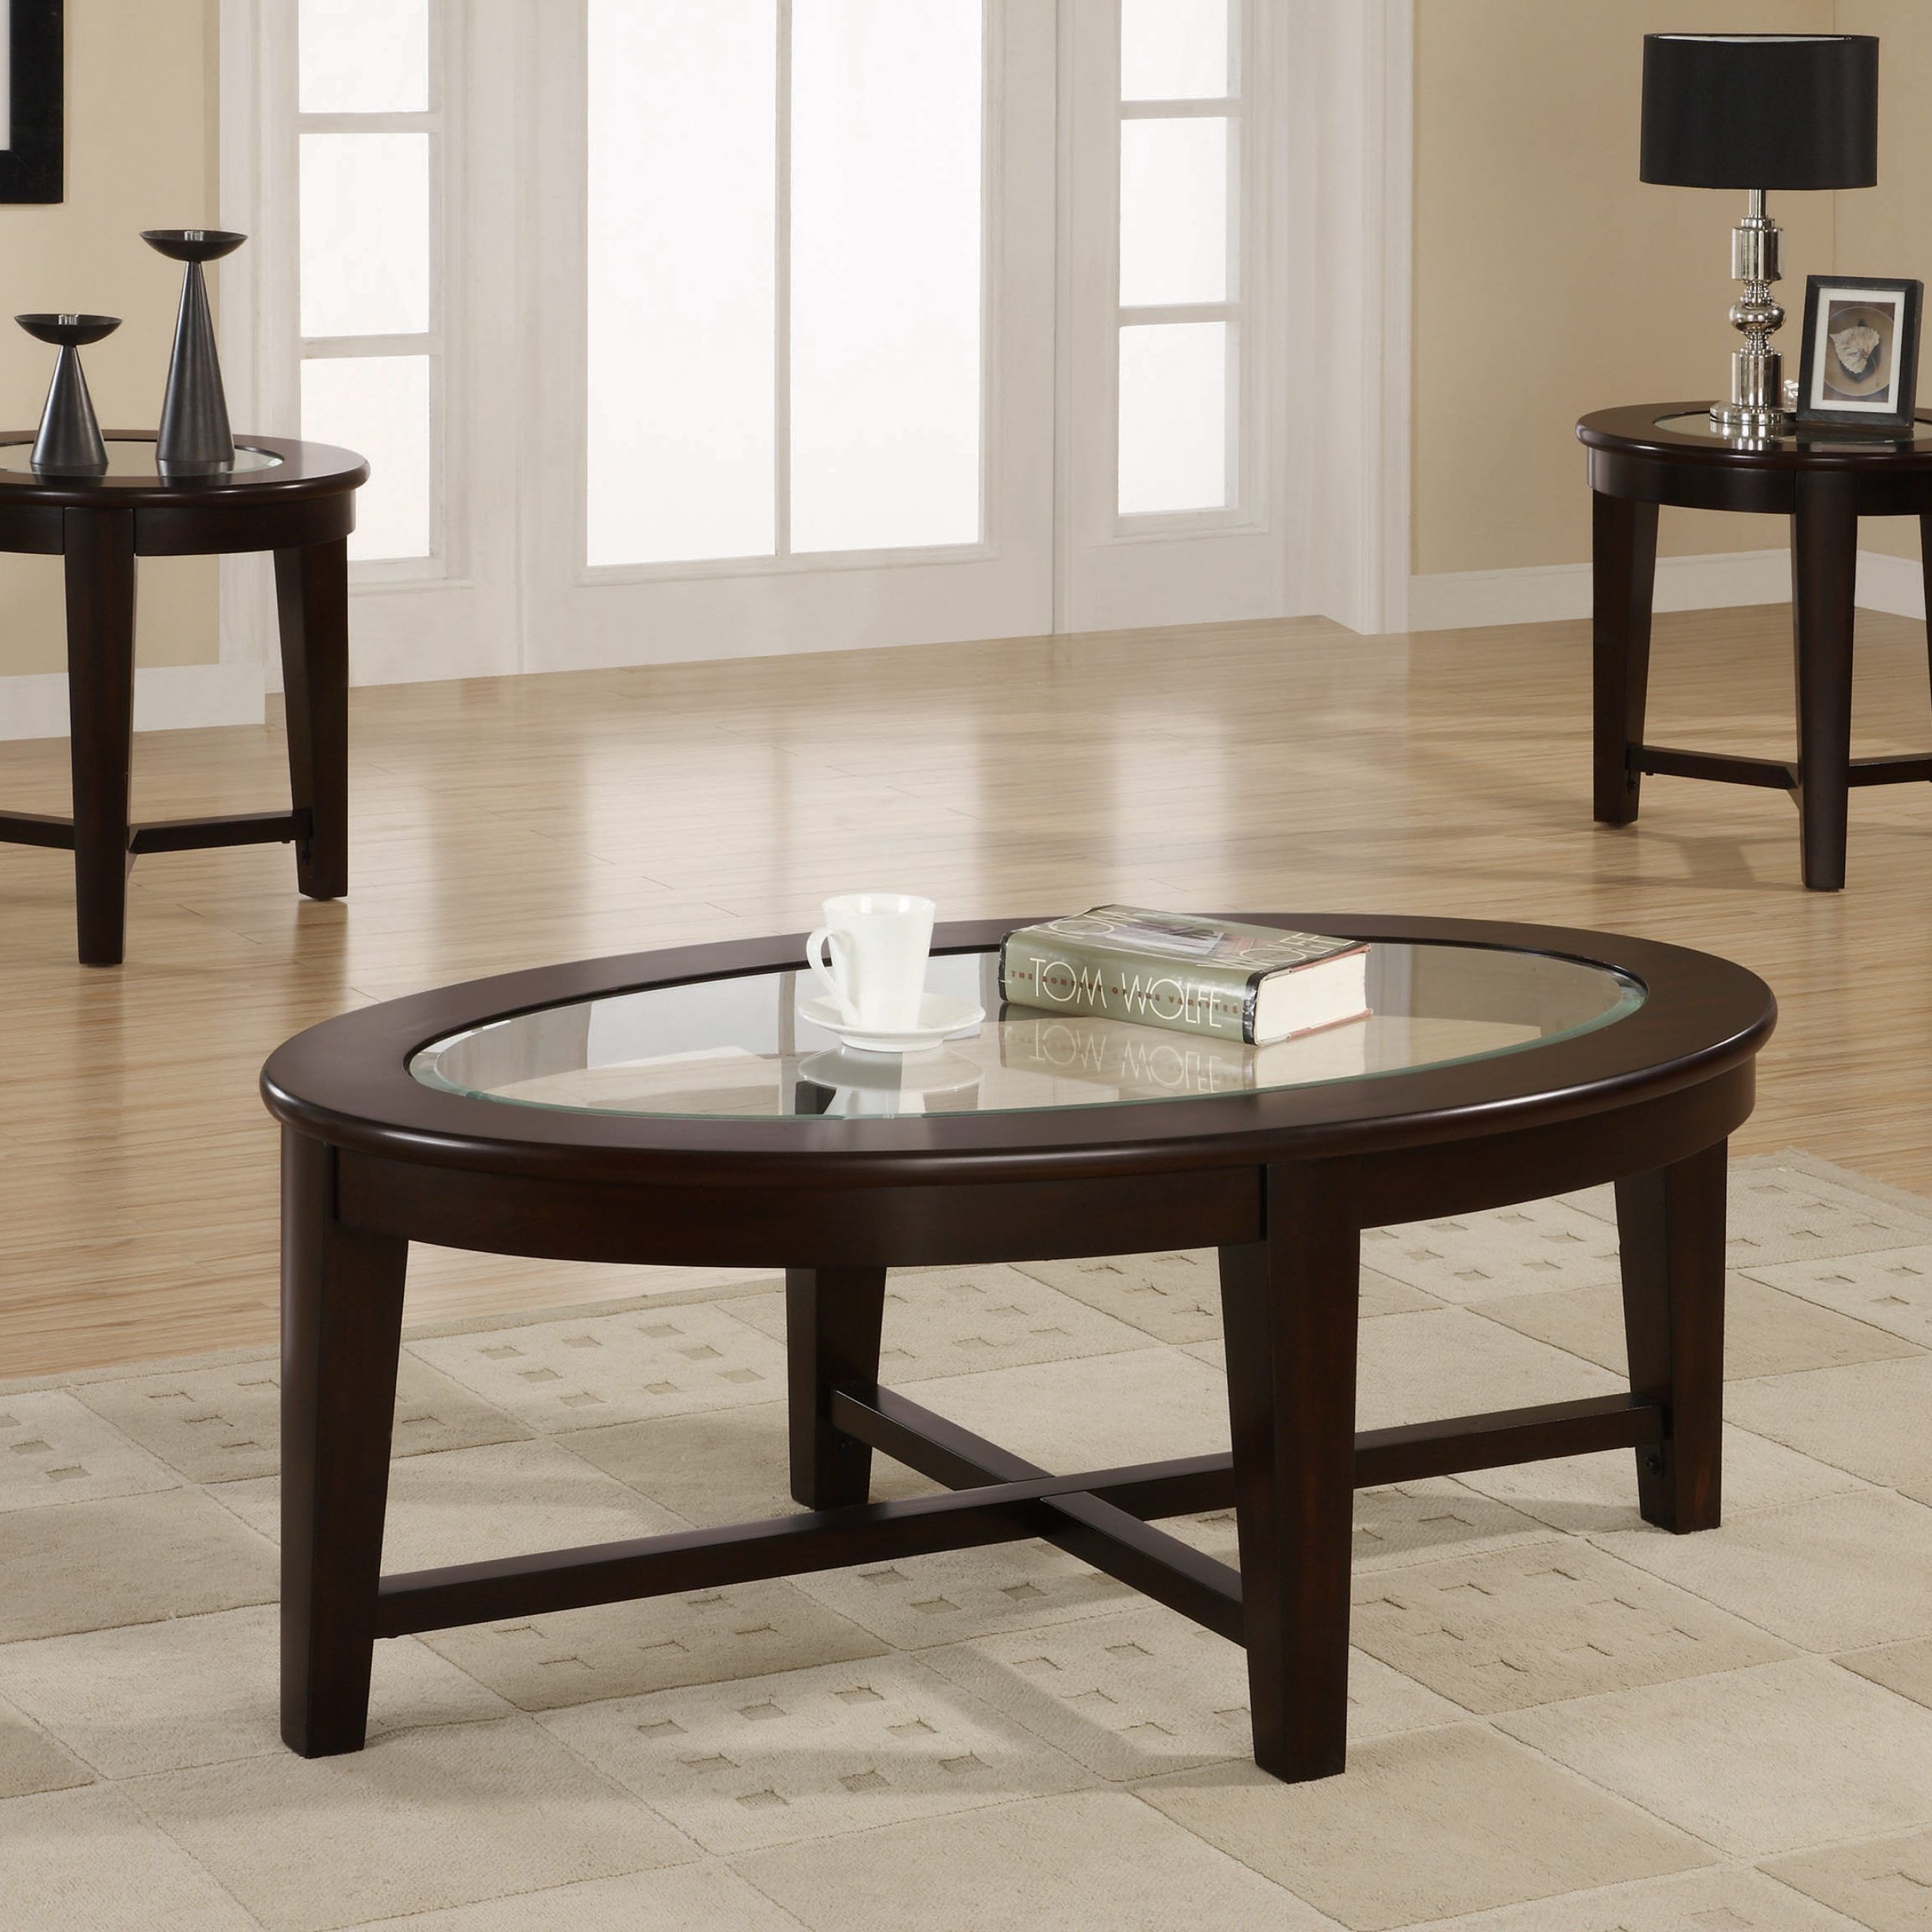 3 Piece Occasional Table Set Cappuccino – Coaster Fine Furniture For Occasional Coffee Tables (Gallery 17 of 20)